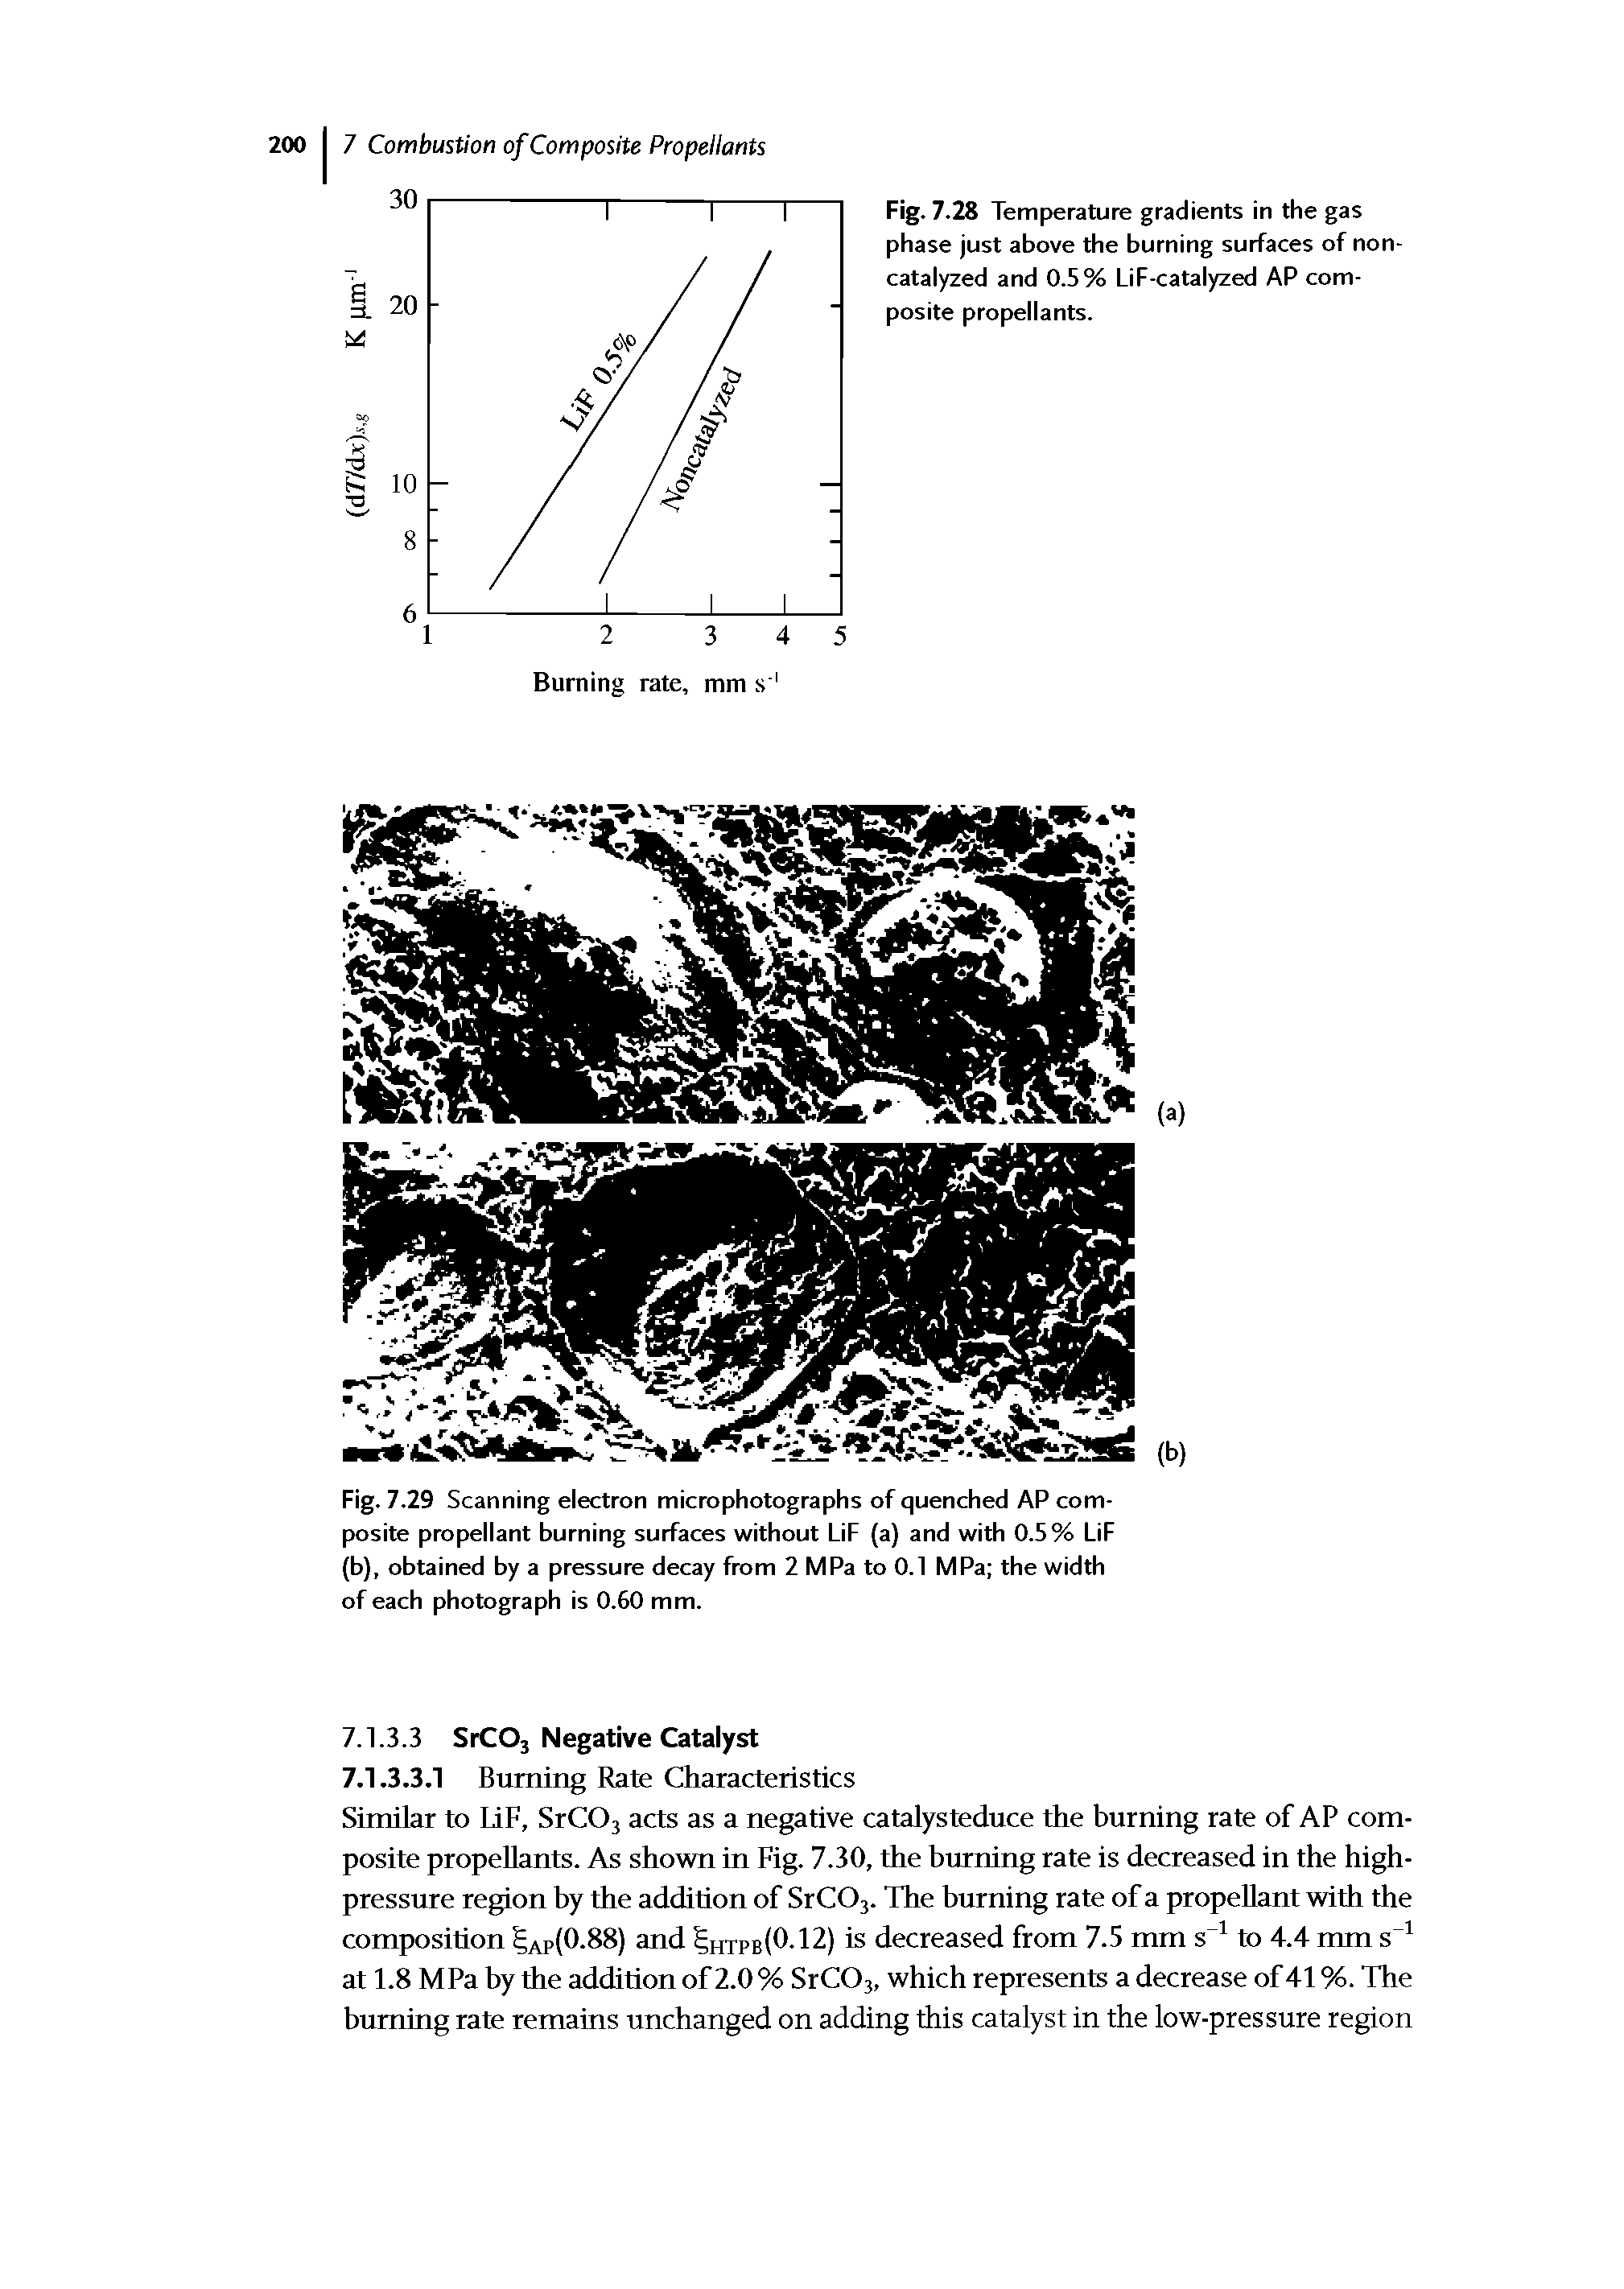 Fig. 7.29 Scanning electron microphotographs of quenched AP composite propellant burning surfaces without LiF (a) and with 0.5% LiF (b), obtained by a pressure decay from 2 MPa to 0.1 MPa the width of each photograph is 0.60 mm.